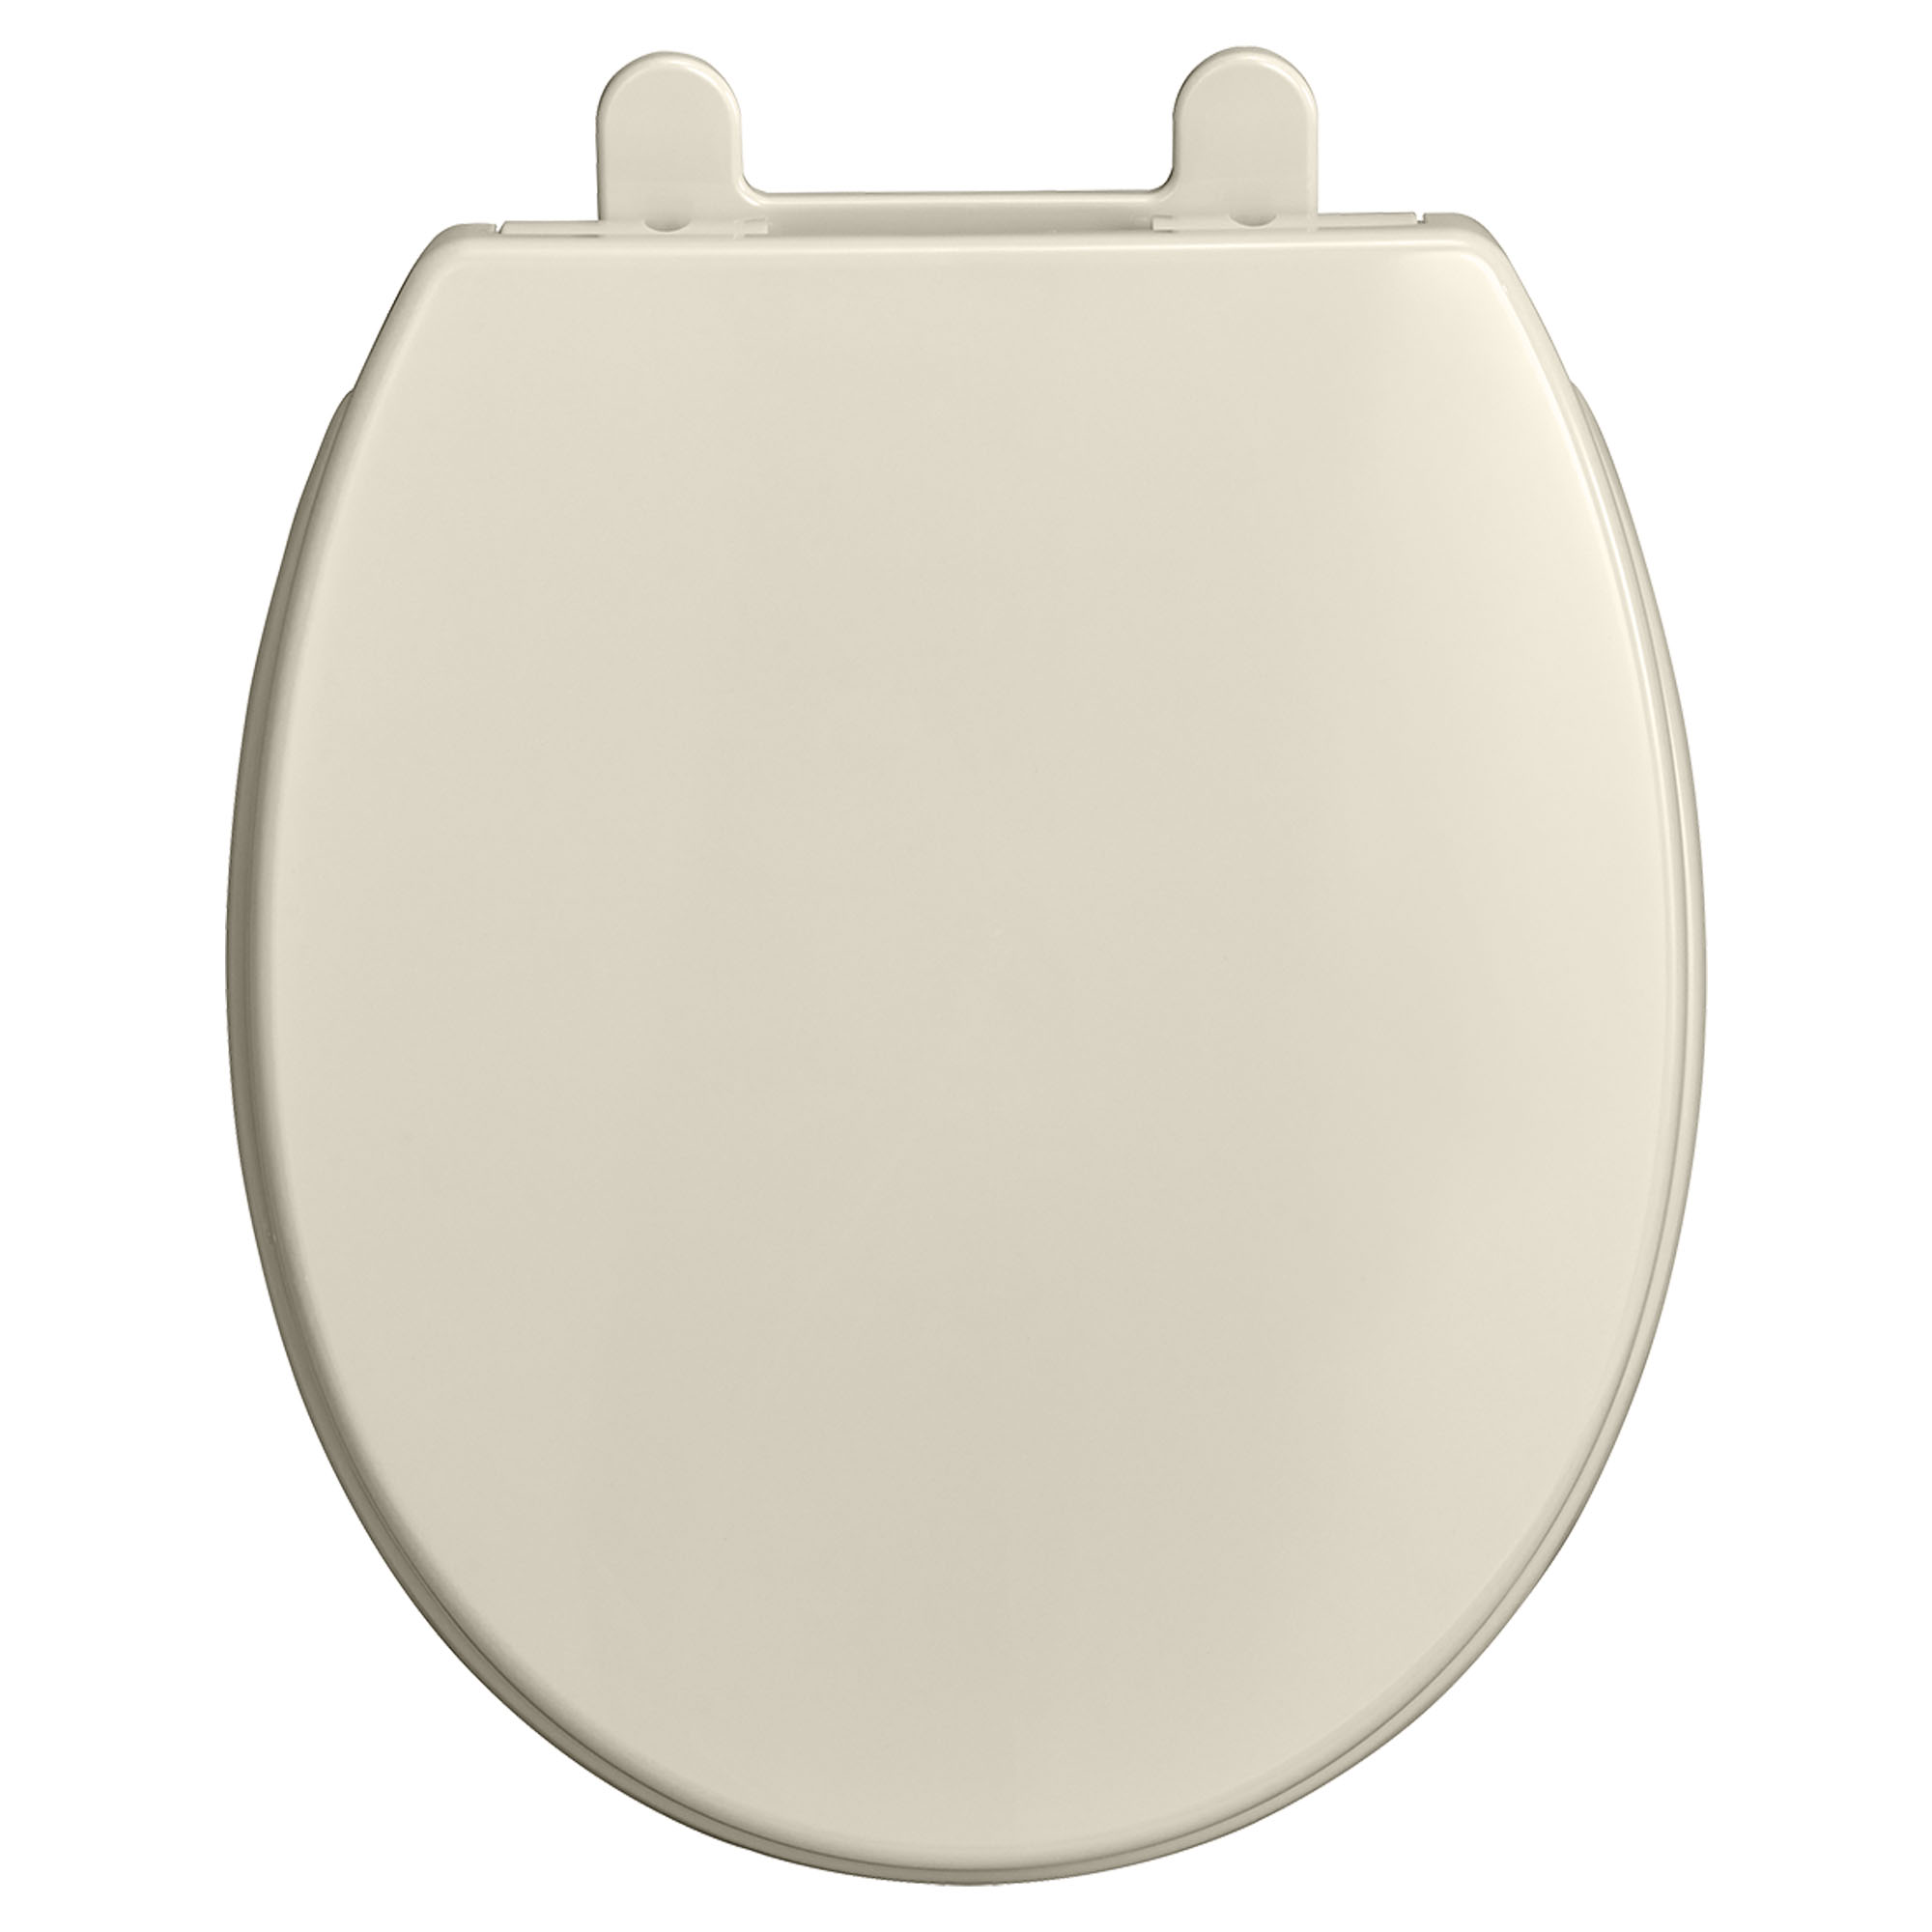 Transitional Slow-Close & Easy Lift-Off Round Front Toilet Seat